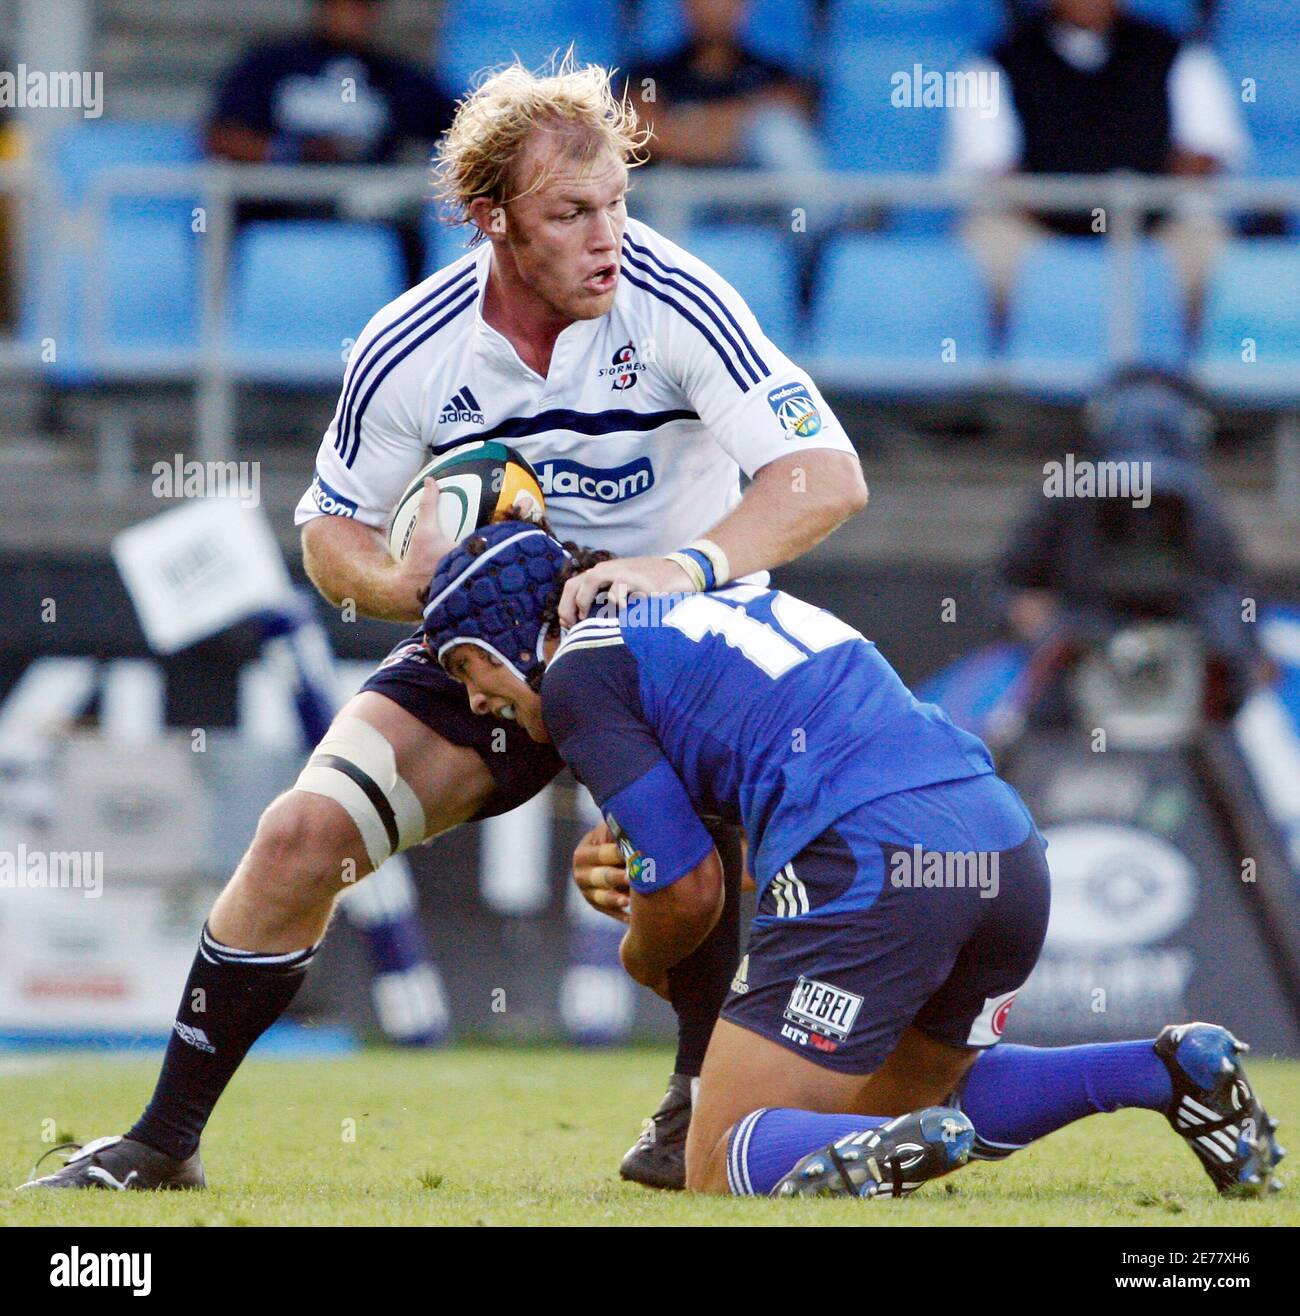 Schalk Burger (L) of the Stormers is tackled by Benson Stanley of the Blues  during the Super 14 rugby match at Eden Park in Auckland, March 22, 2008.  REUTERS/Nigel Marple (NEW ZEALAND